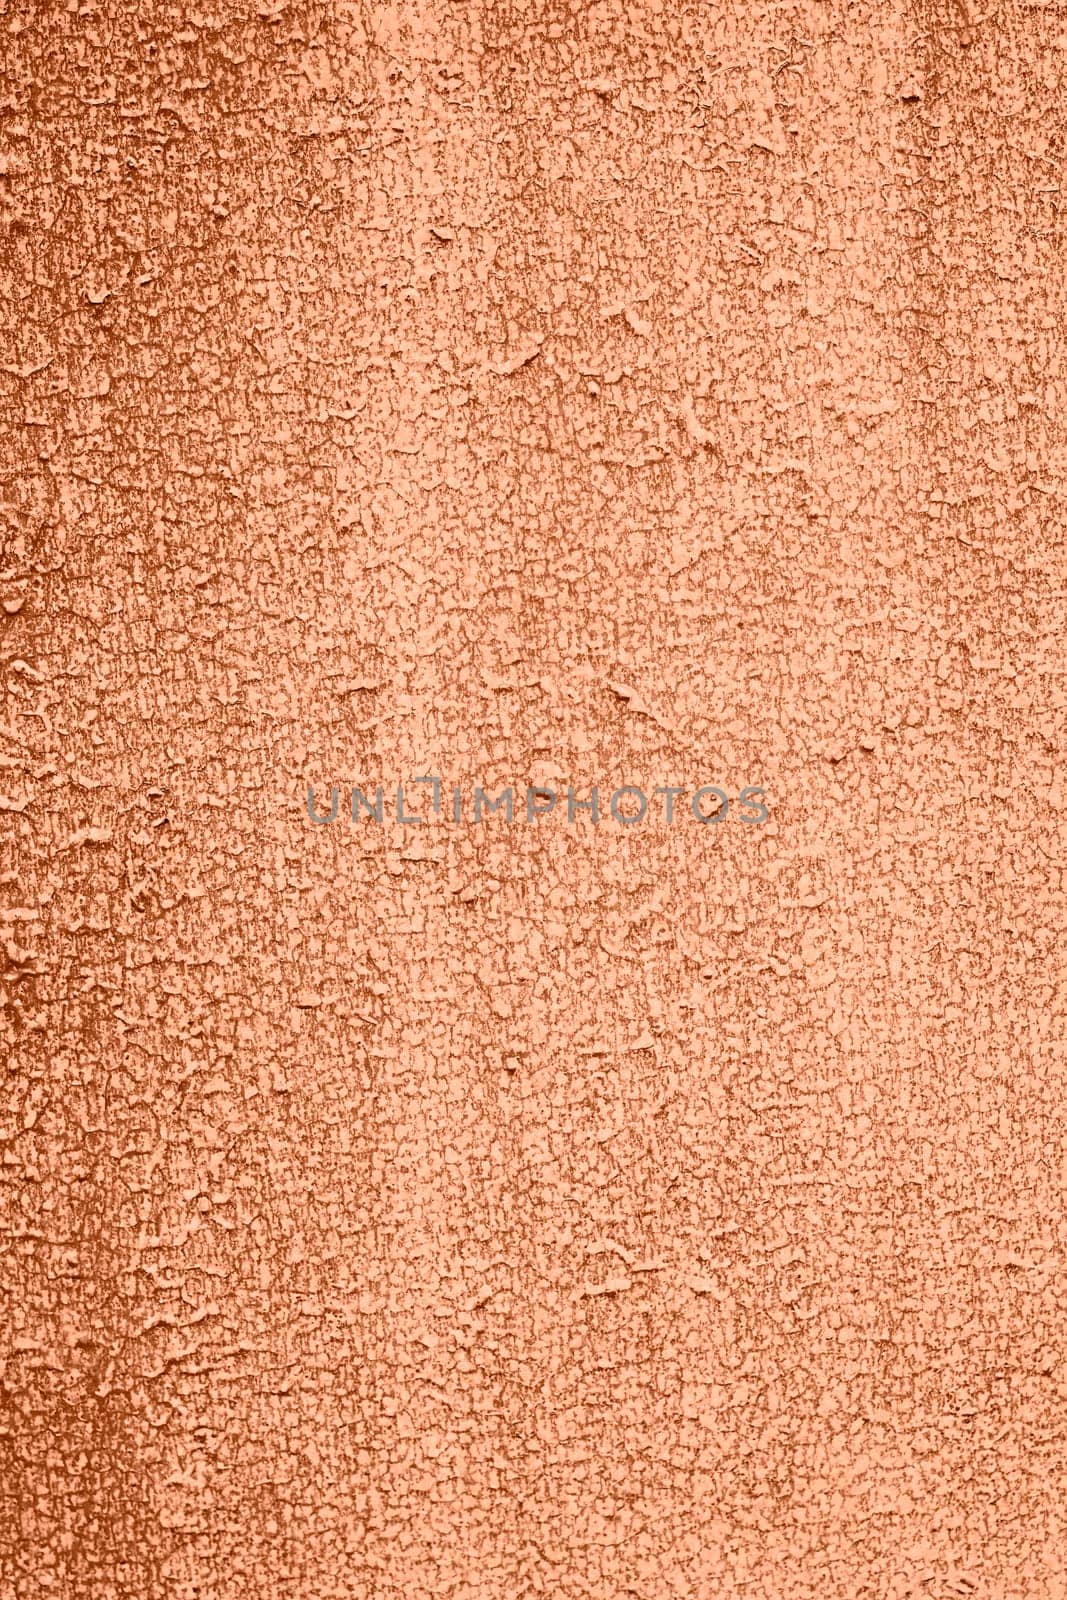 Peach Fuzz toned colour grunge decorative wall background. Art rough stylized texture banner trendy color 2024. Grunge Peach Fuzz color texture. High quality photo